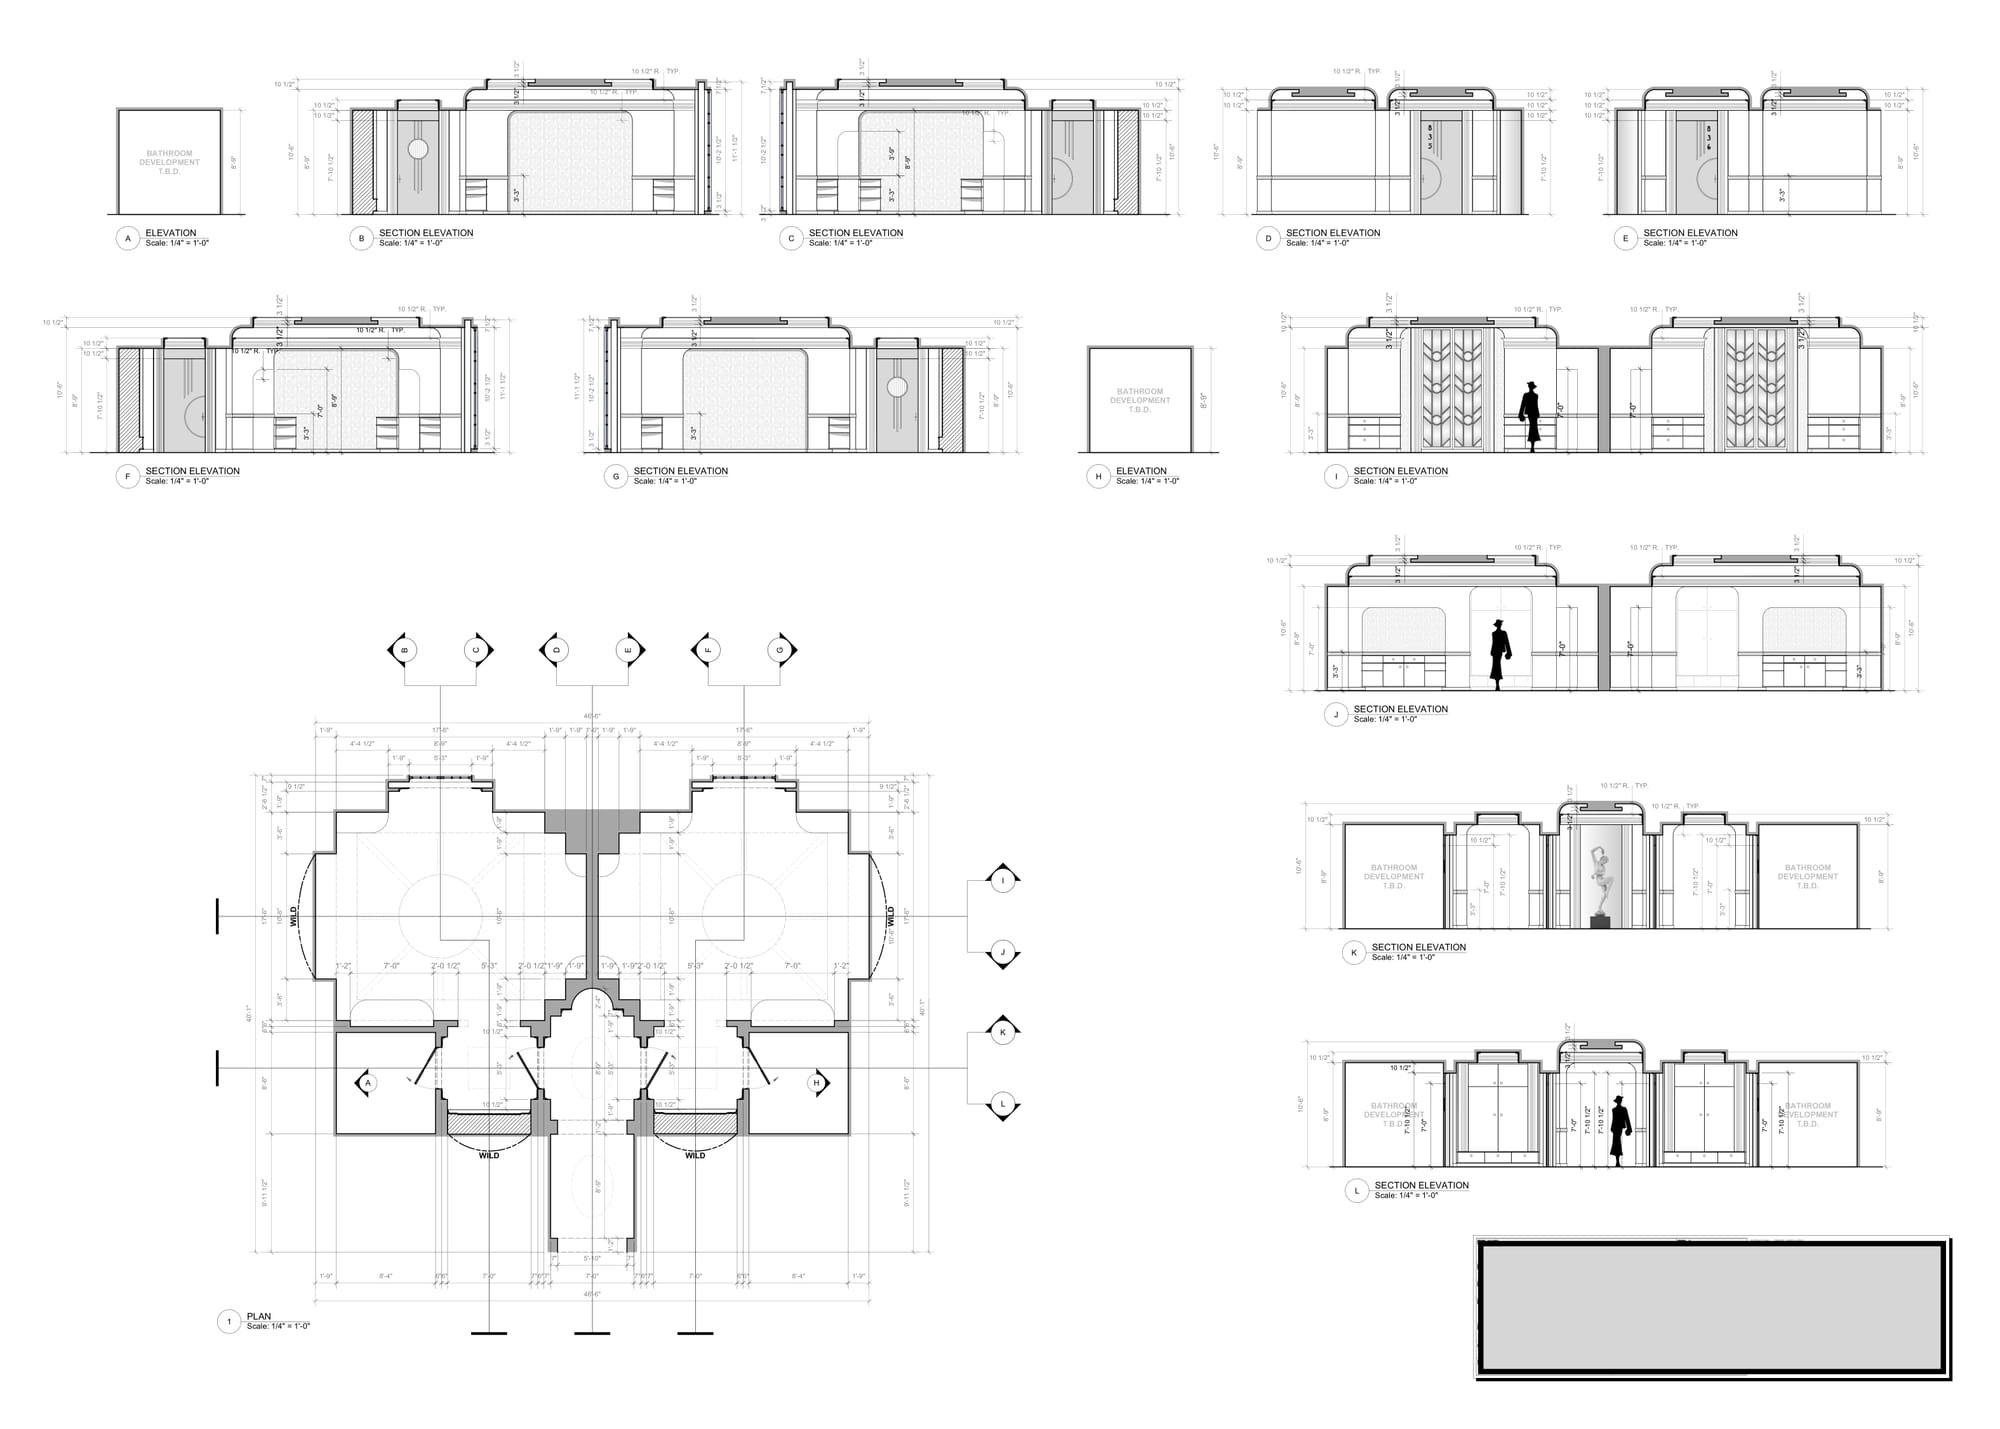 Radiant - interior Belmont Hotel Suites, plan and elevations plate